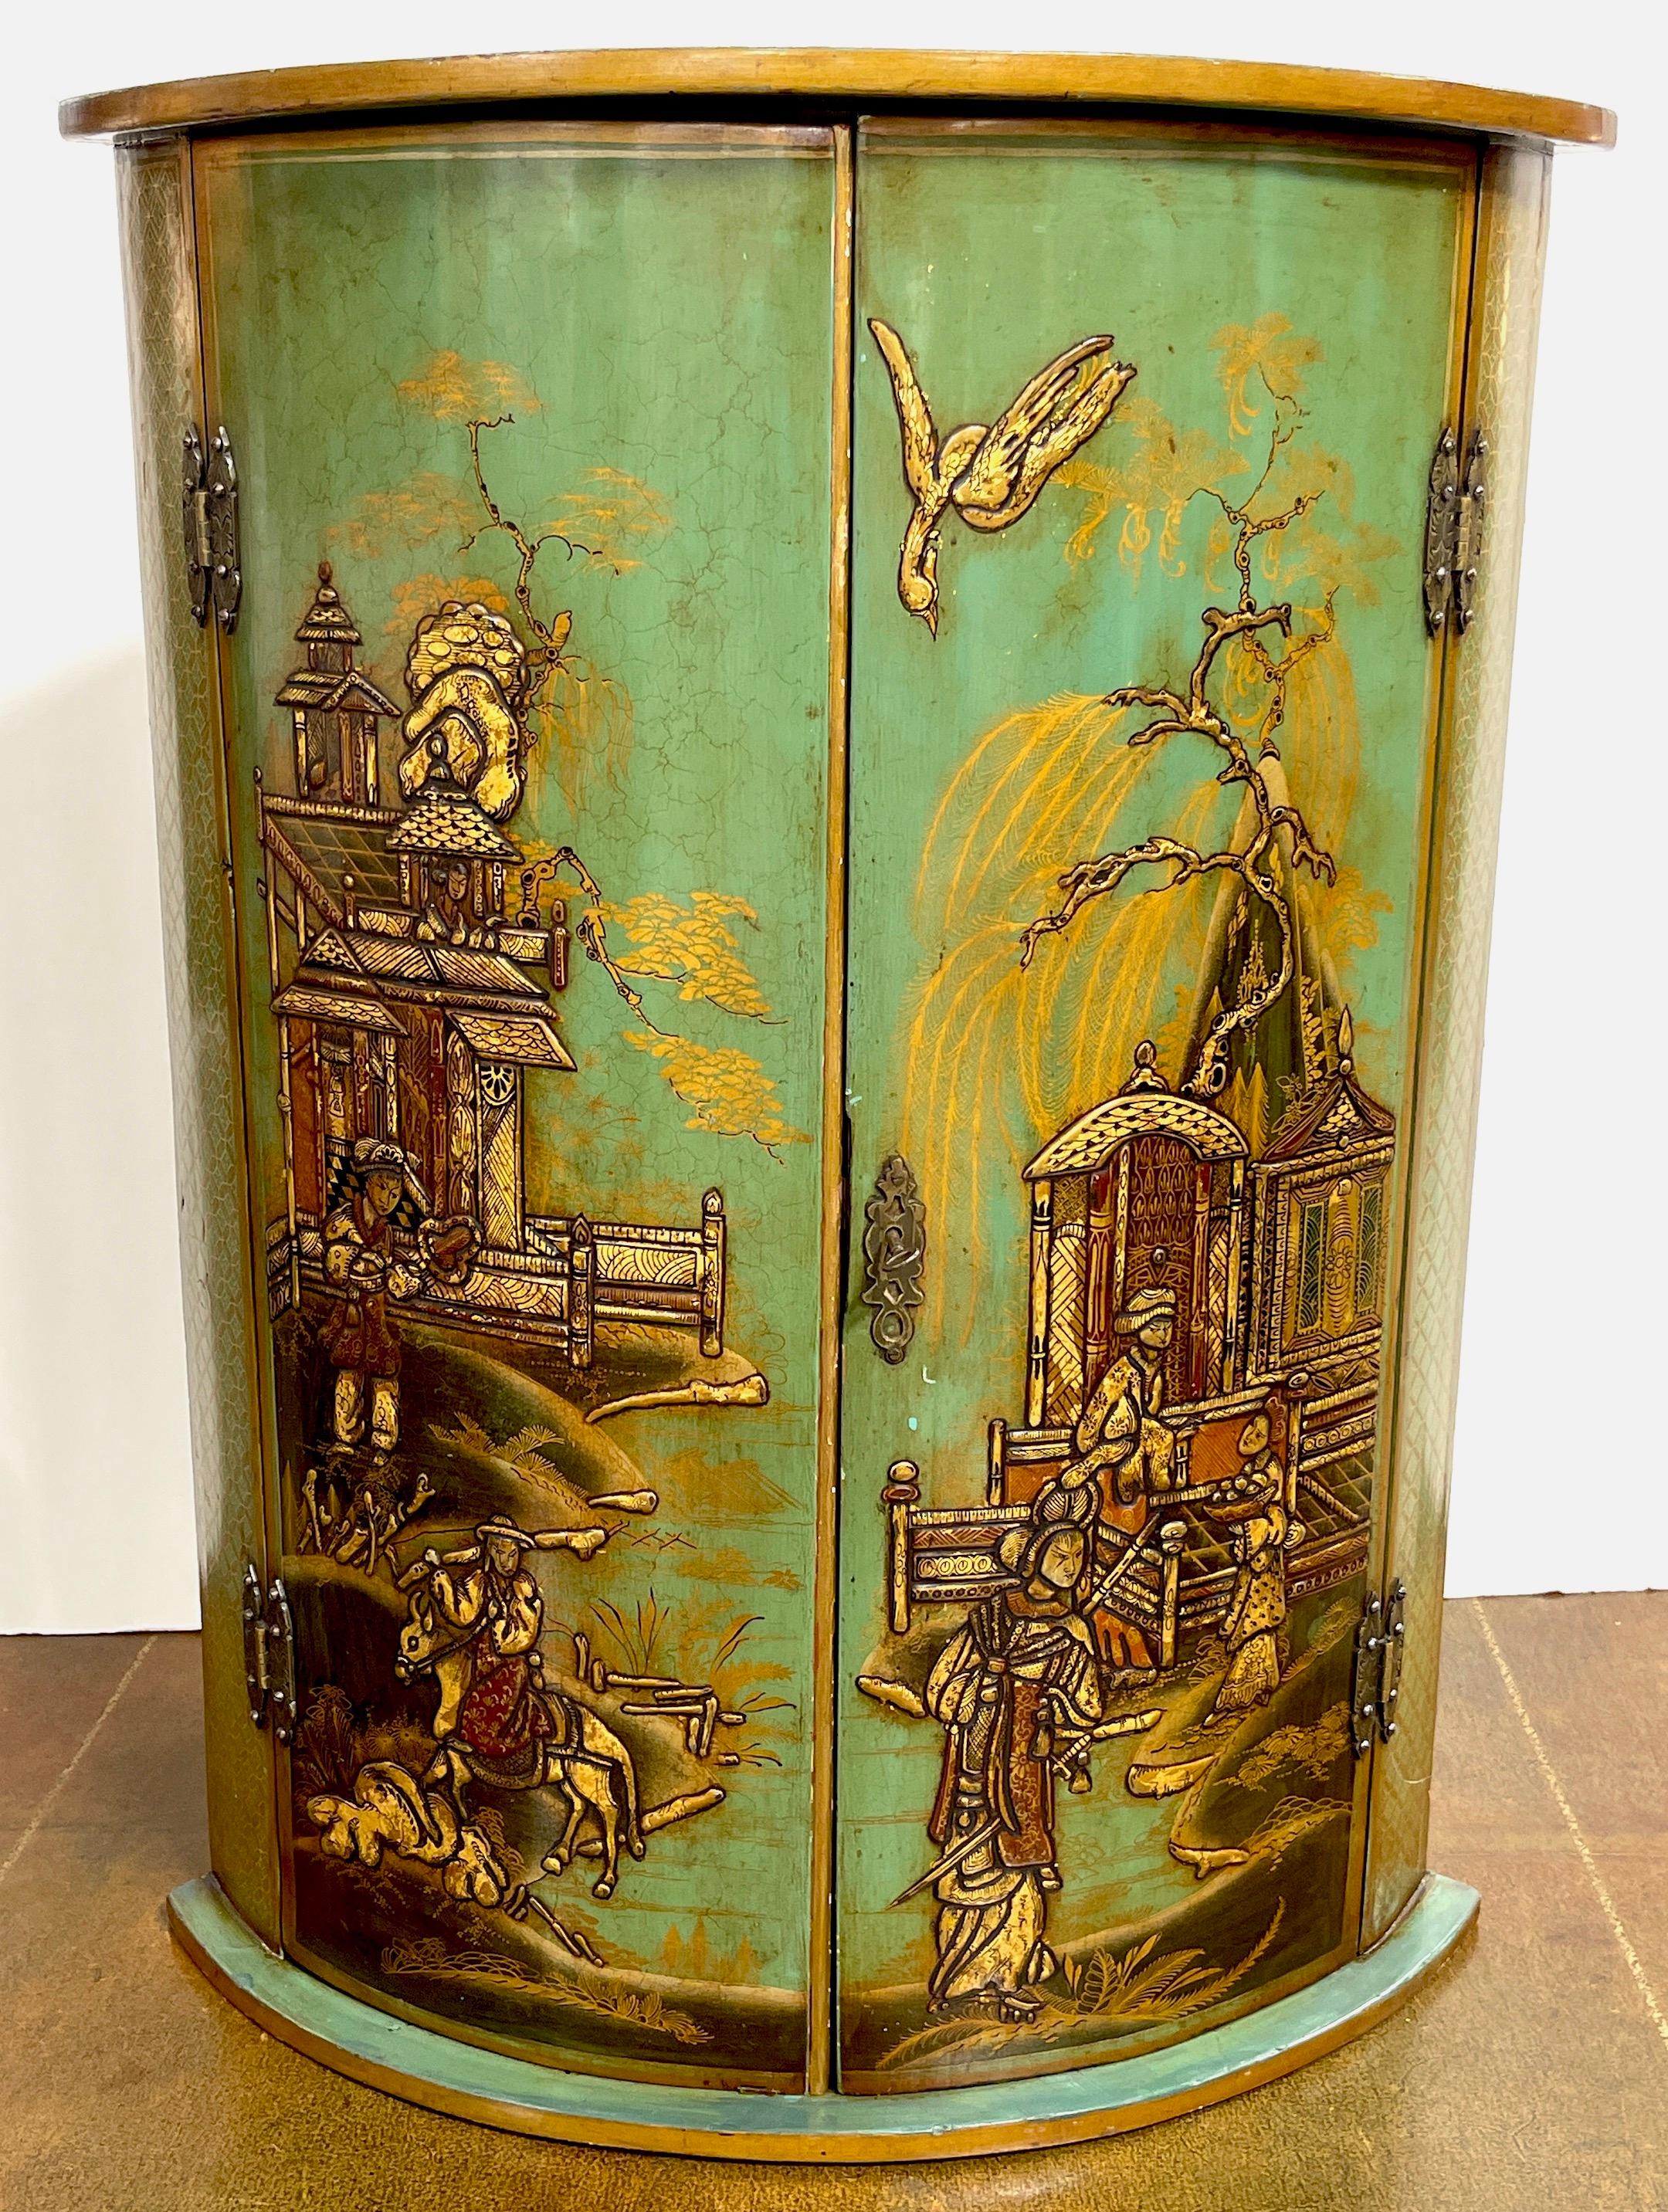 Georgian style Chinoiserie olive-green Lacquered blind door corner cupboard 
England, Circa 1890s

A good example of late 19th century English Chinoiserie lacquer work in a medium olive tone. Fitted with twin locking rounded doors decorated with